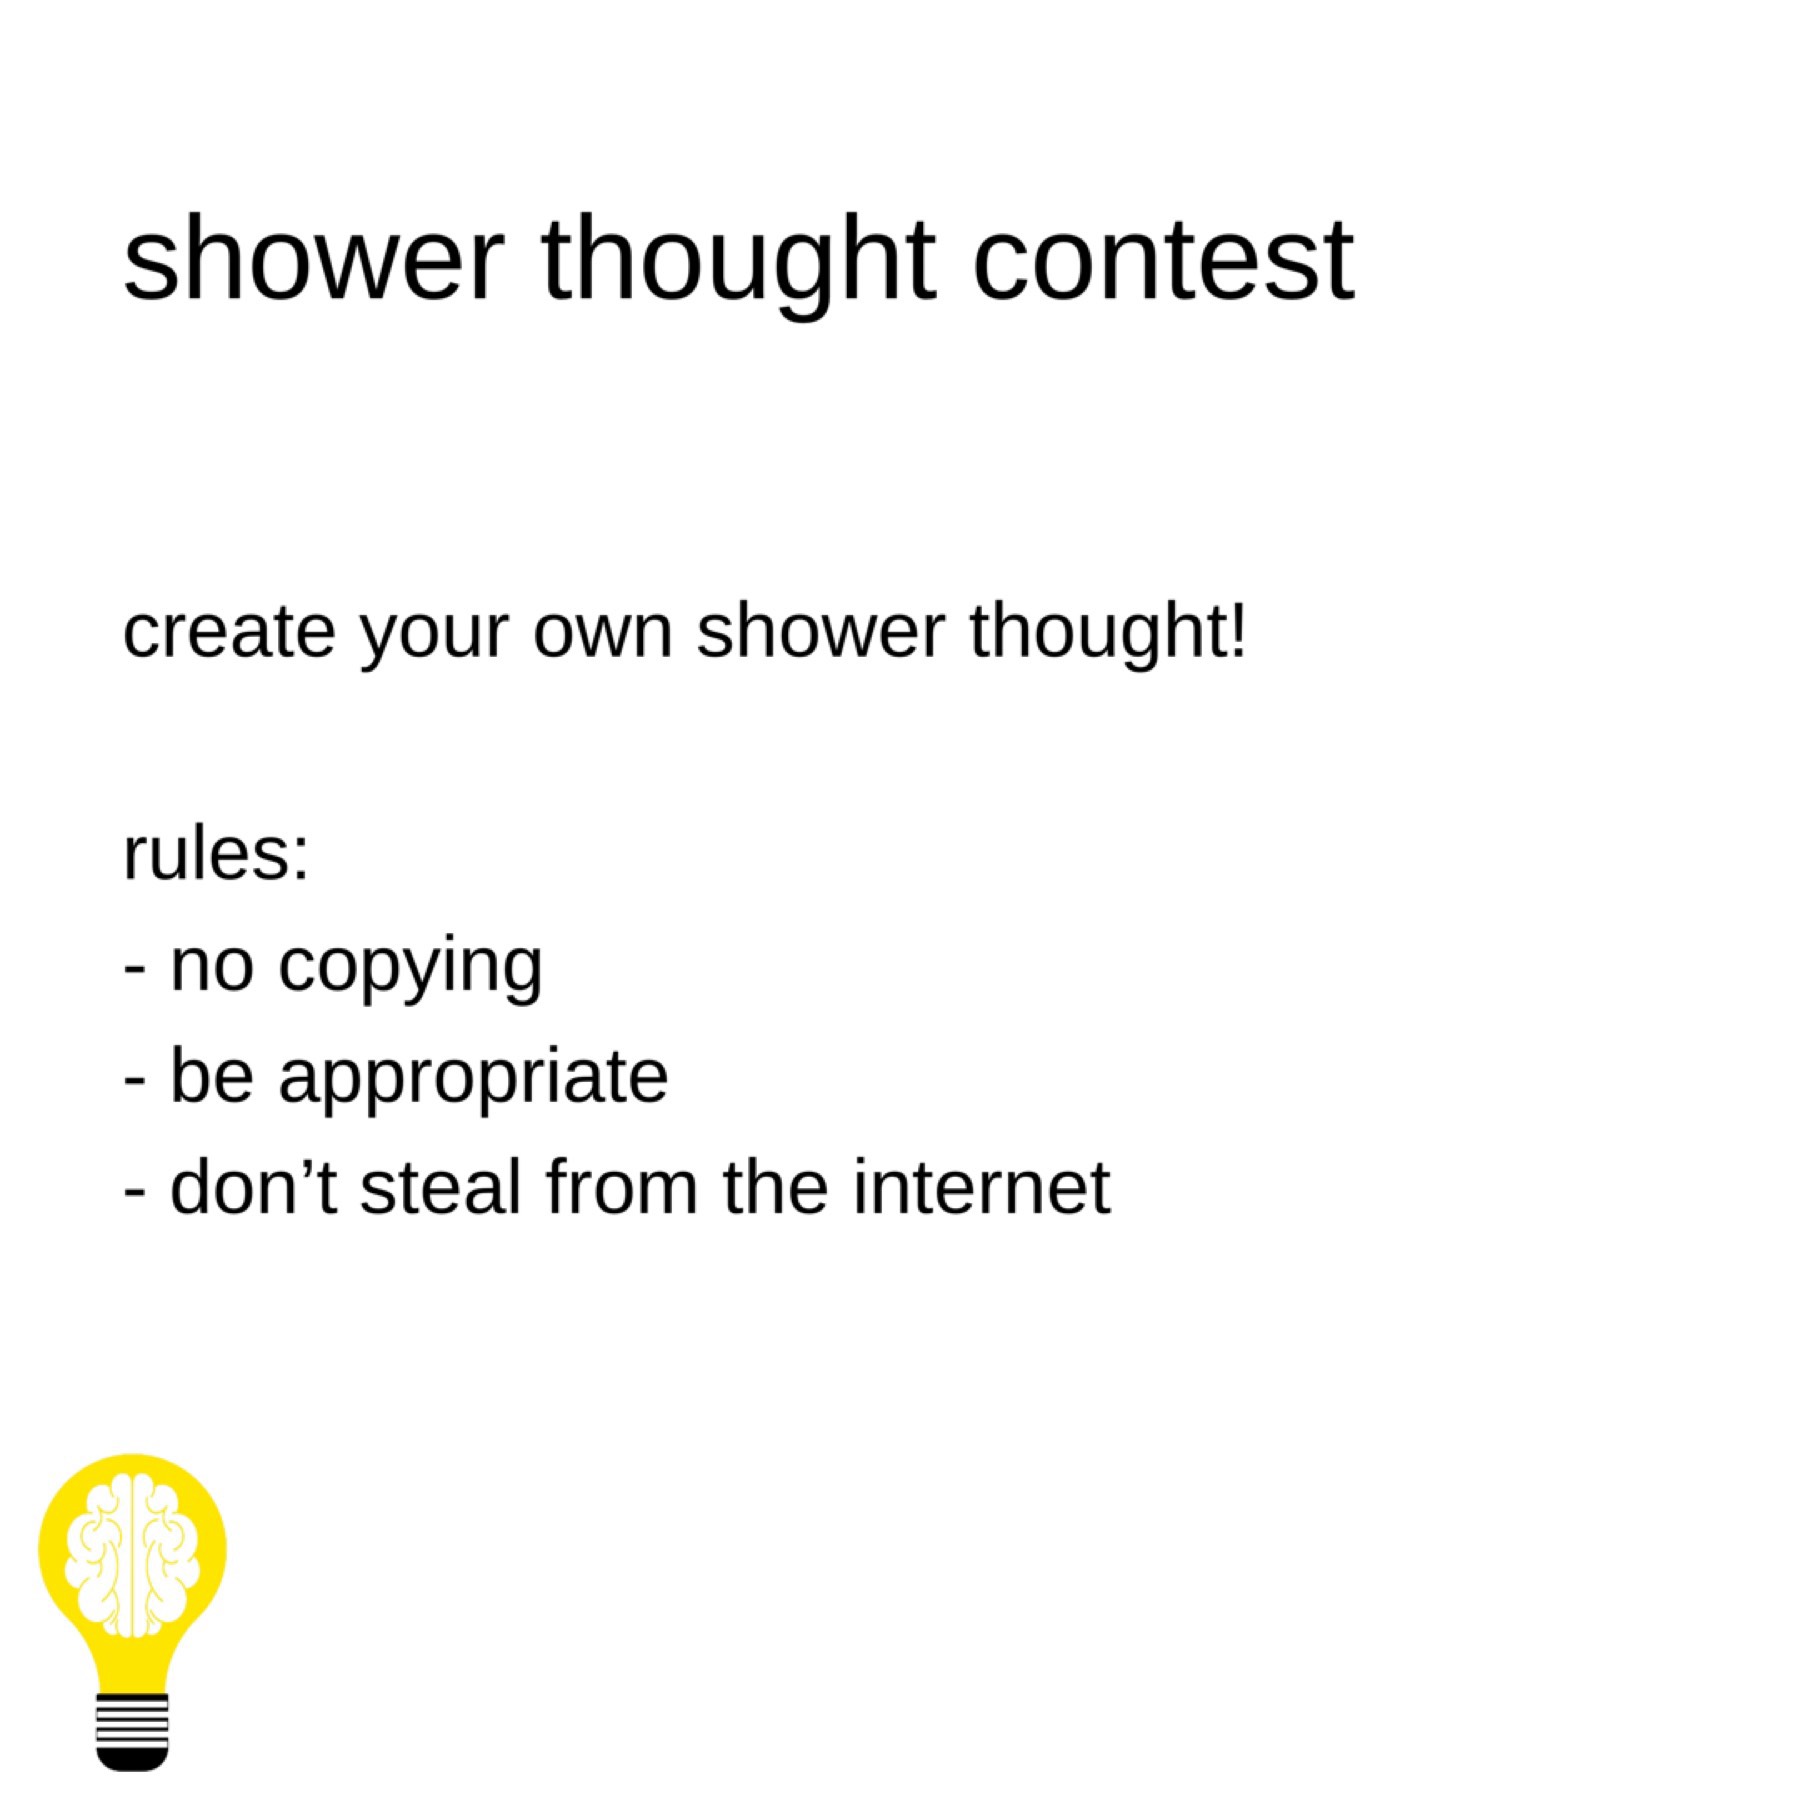 tap for something 🏆

there will be three winners
each will have their shower thought
posted on this account

(there may be other prizes)

this will end when I find
three that I like the best